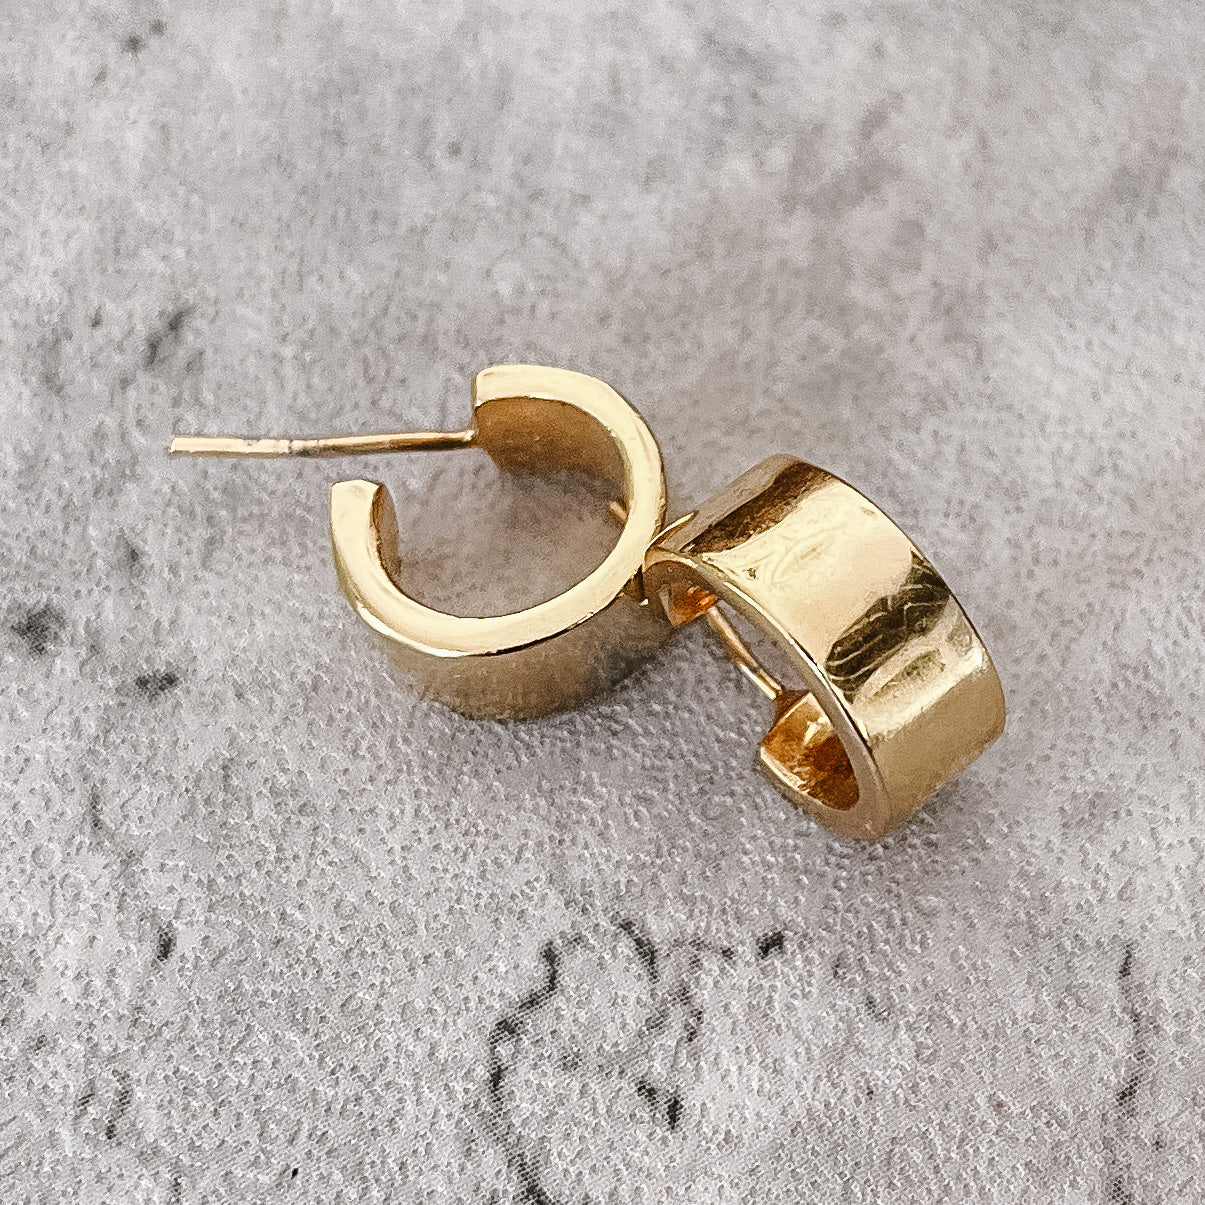 JustOne's brass gold plated small hoops that hug your ear, handcrafted in Kenya